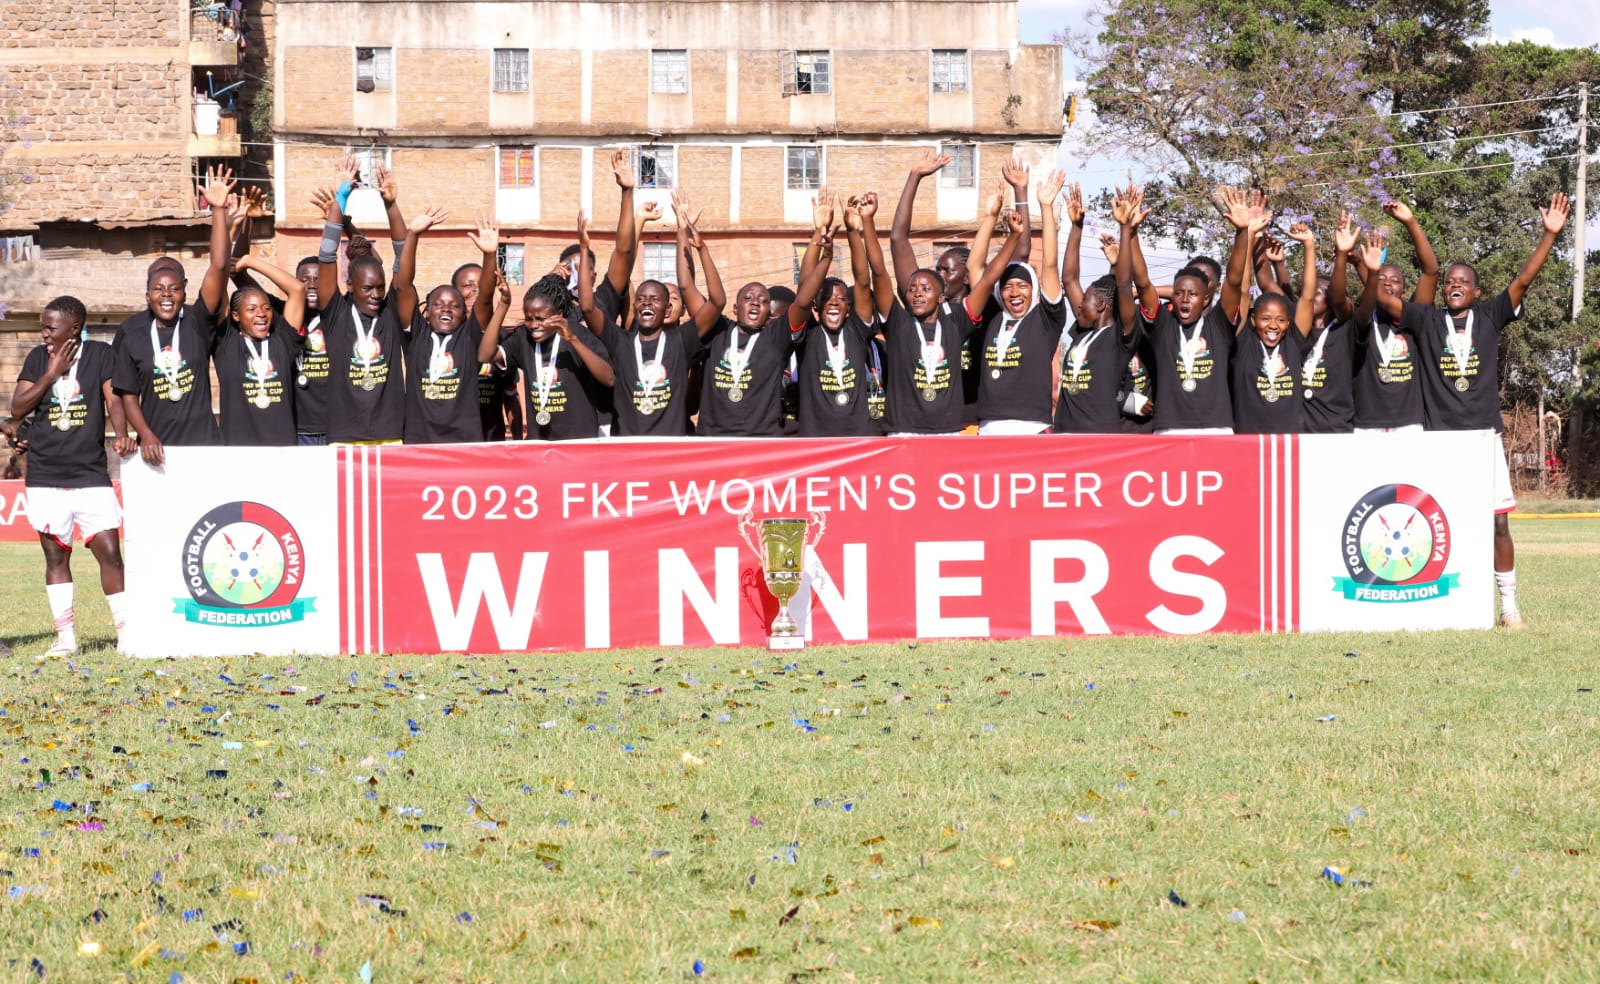 Group photo of 2023 FKF Womens Super Cup Winners.